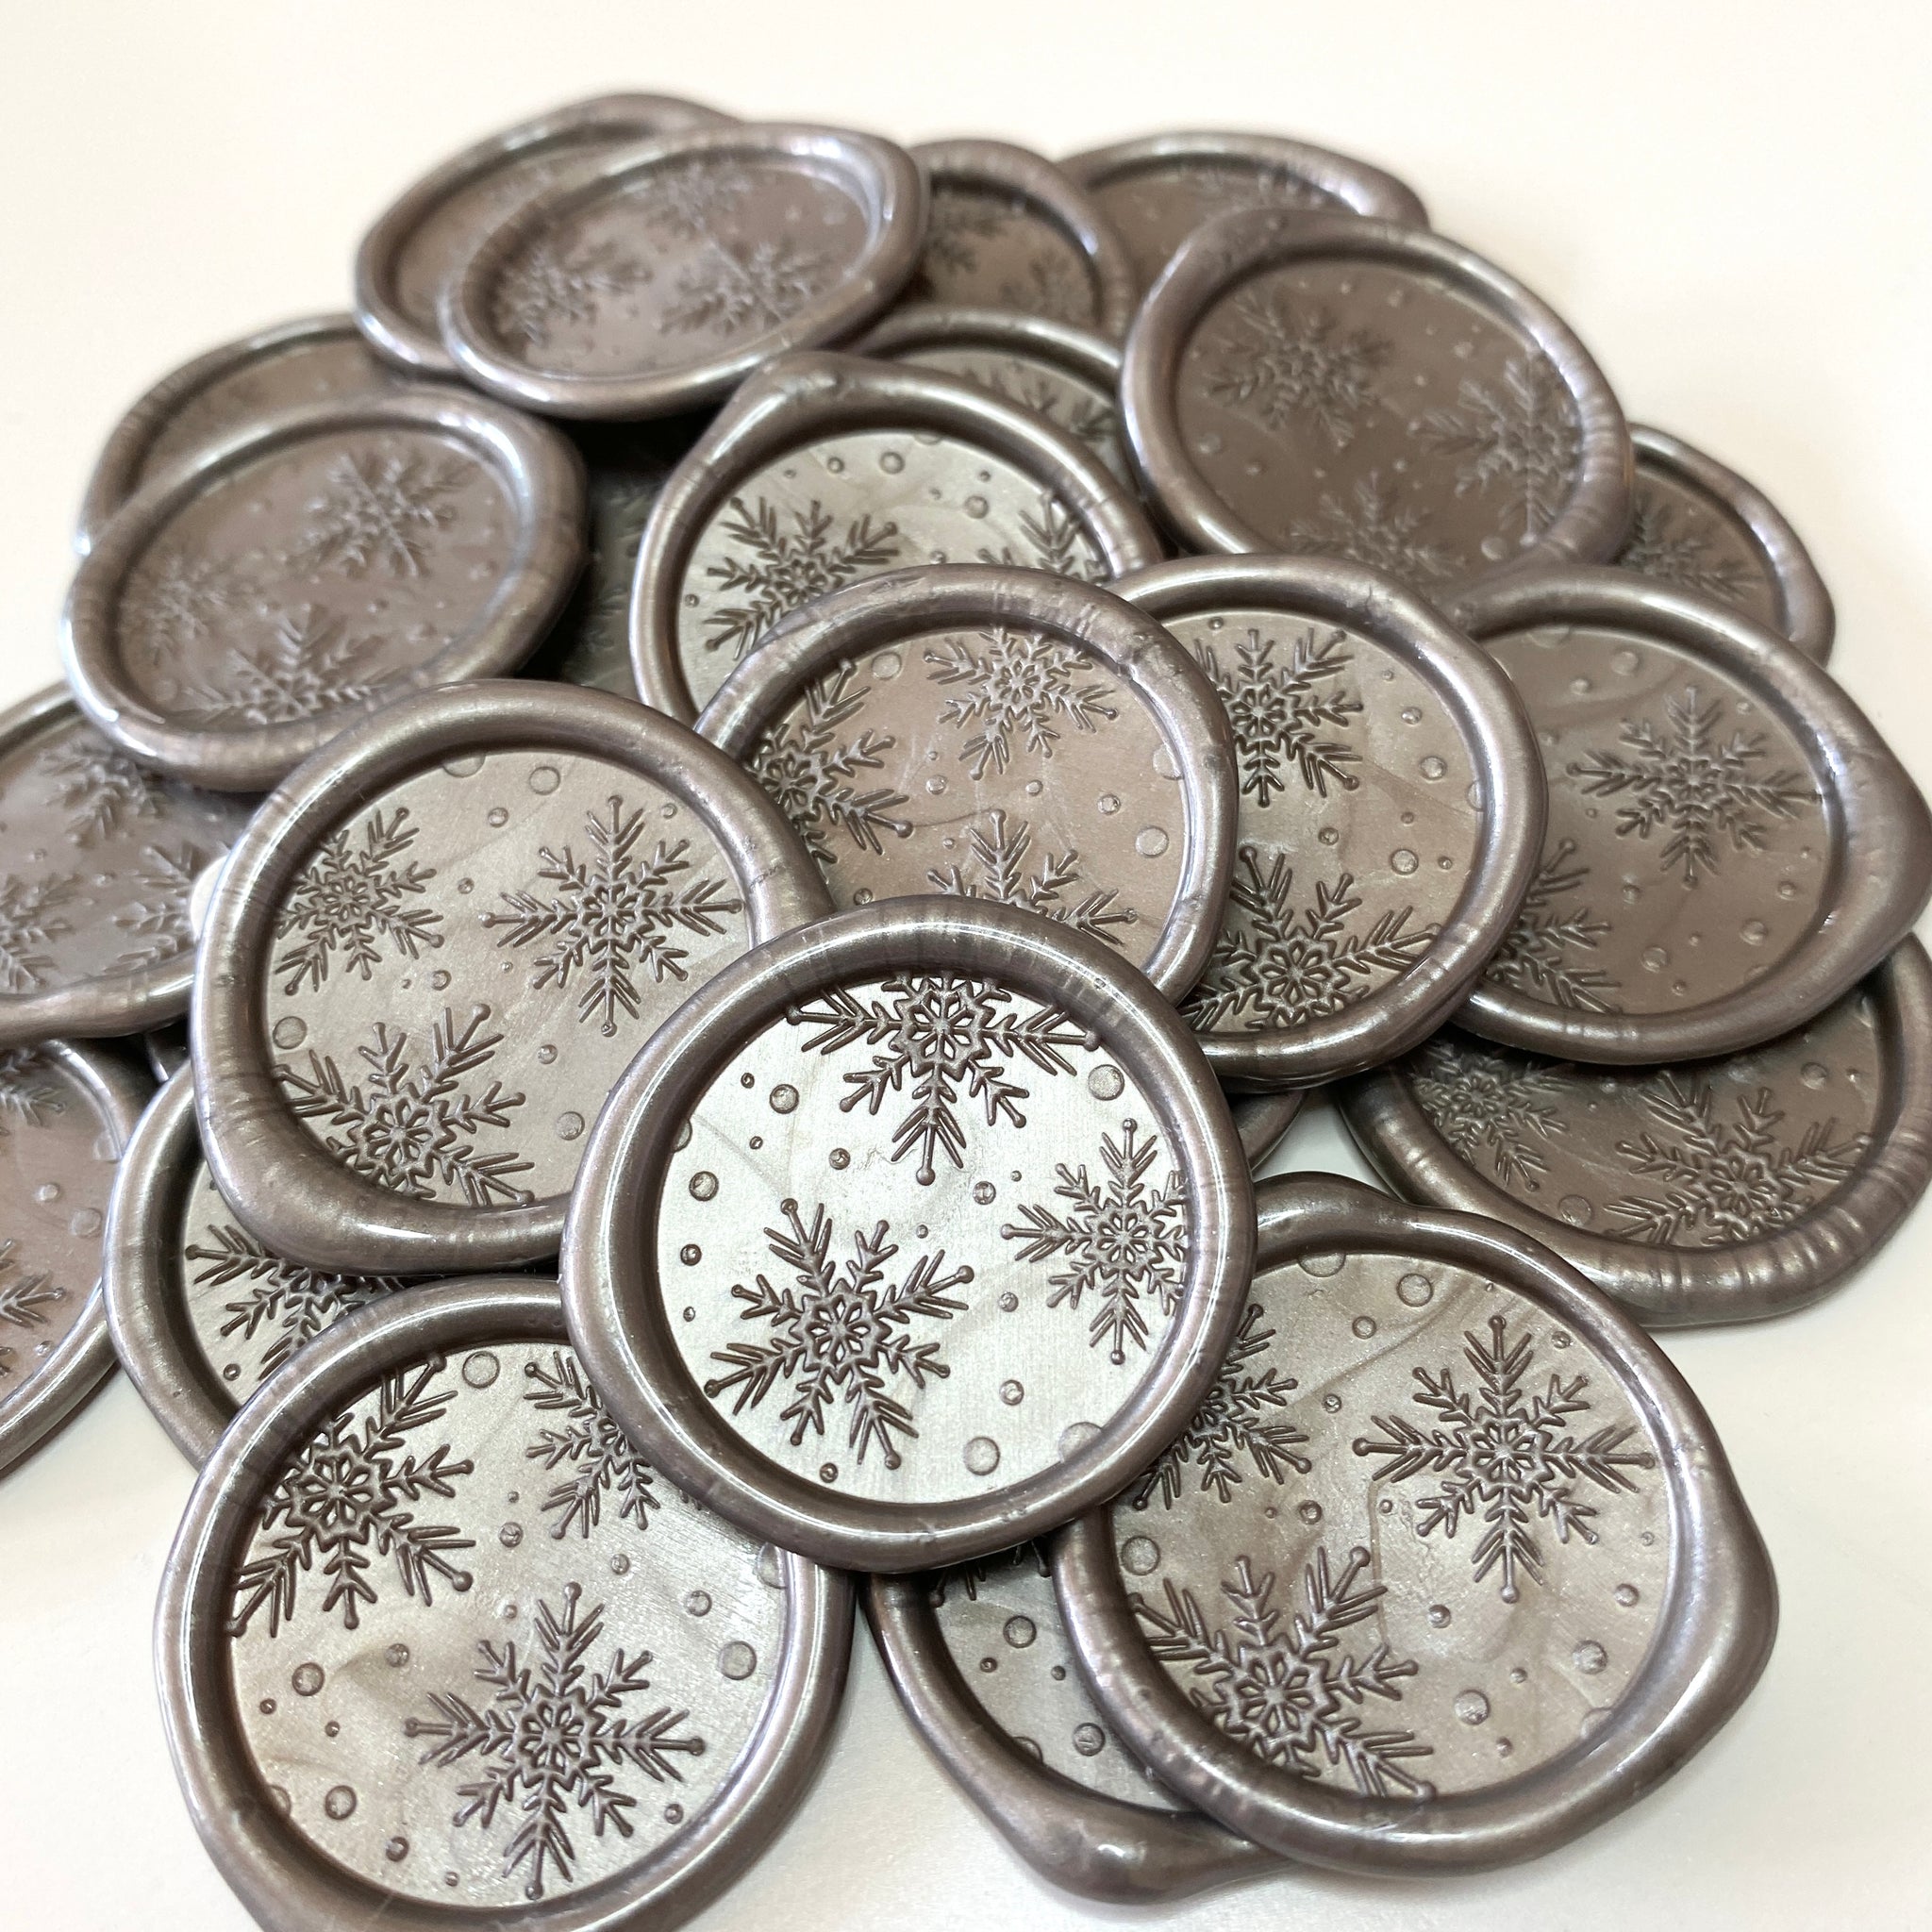 Snowflakes Wax Seals - Pack of 25